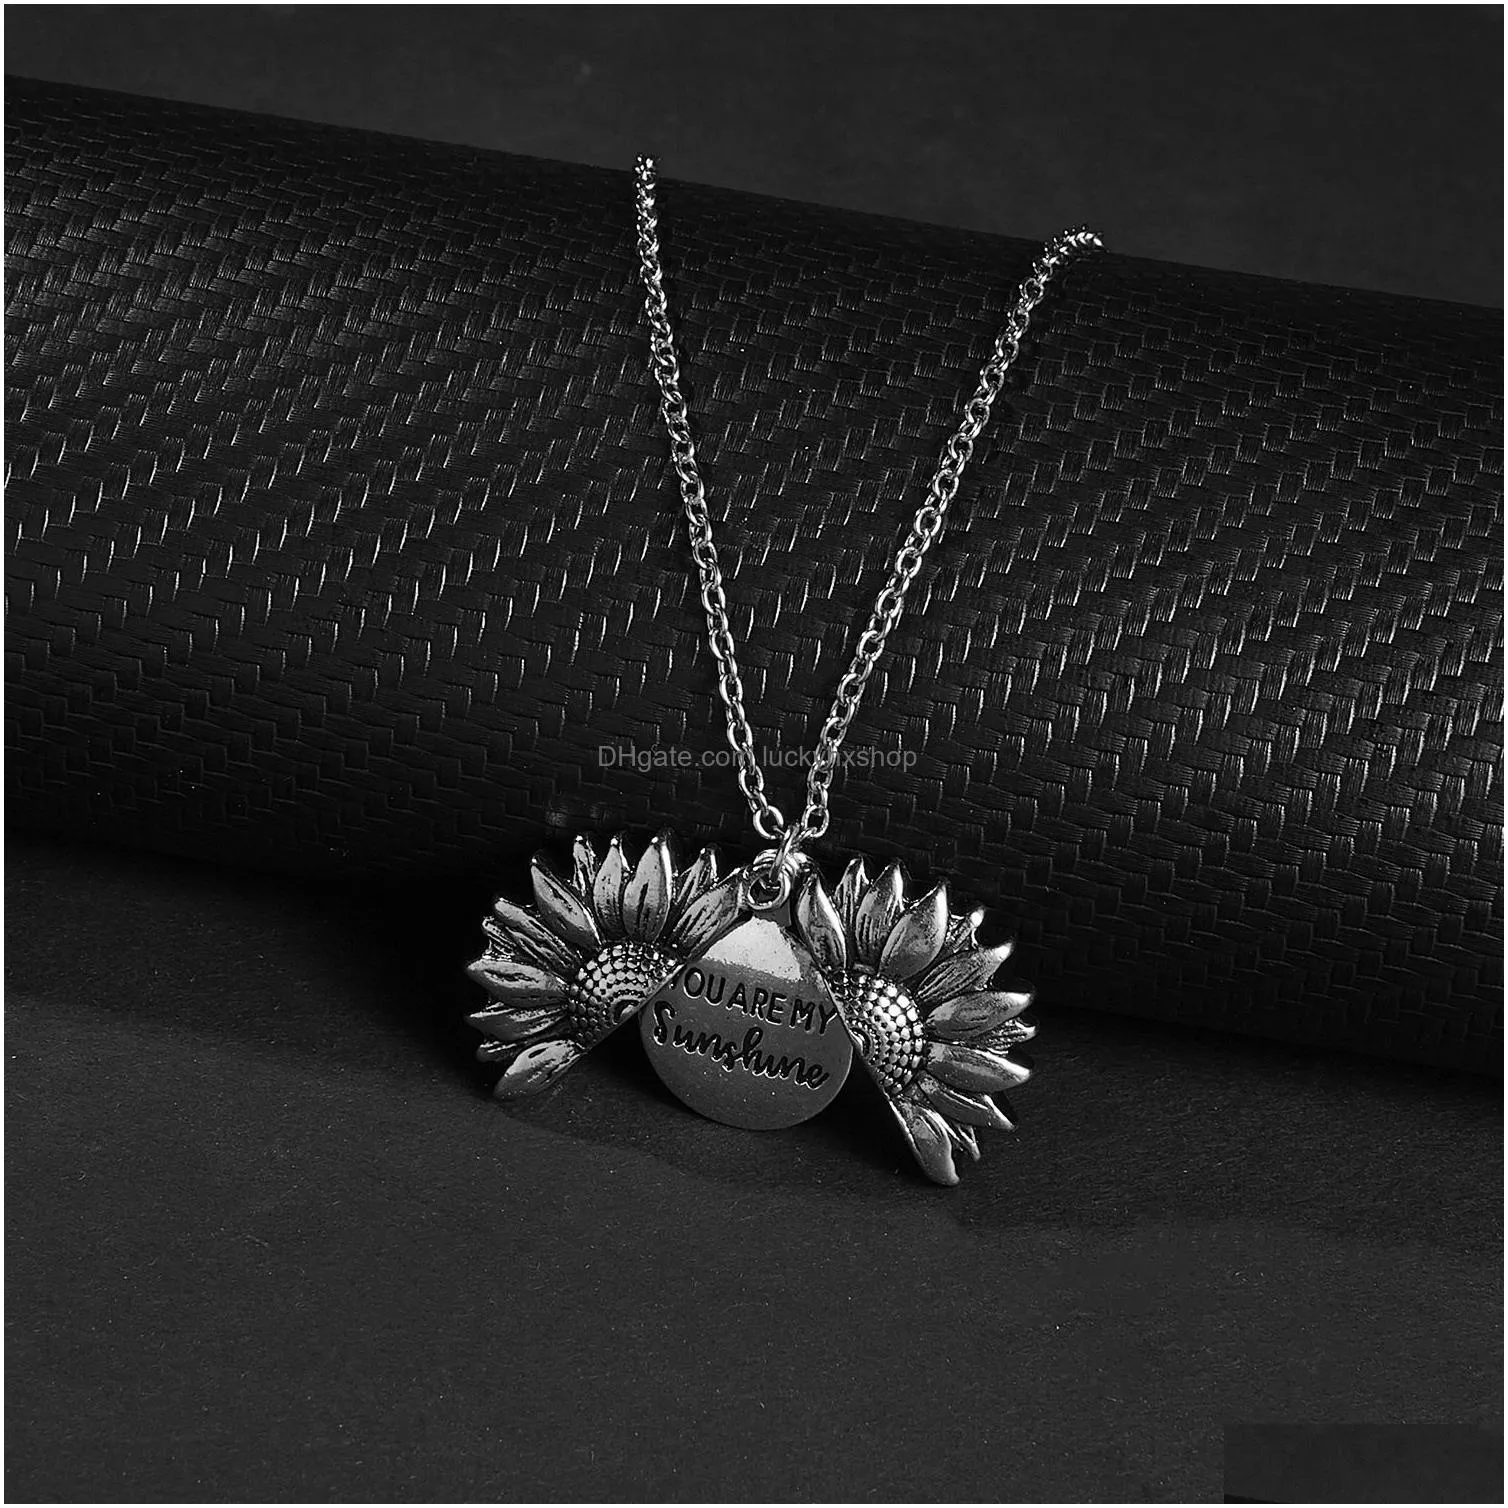 Pendant Necklaces You Are My Sunshine Sunflower Necklaces For Women Gold Open Locket Pendant Long Chain Fashion Inspirational Jewelry Dh623